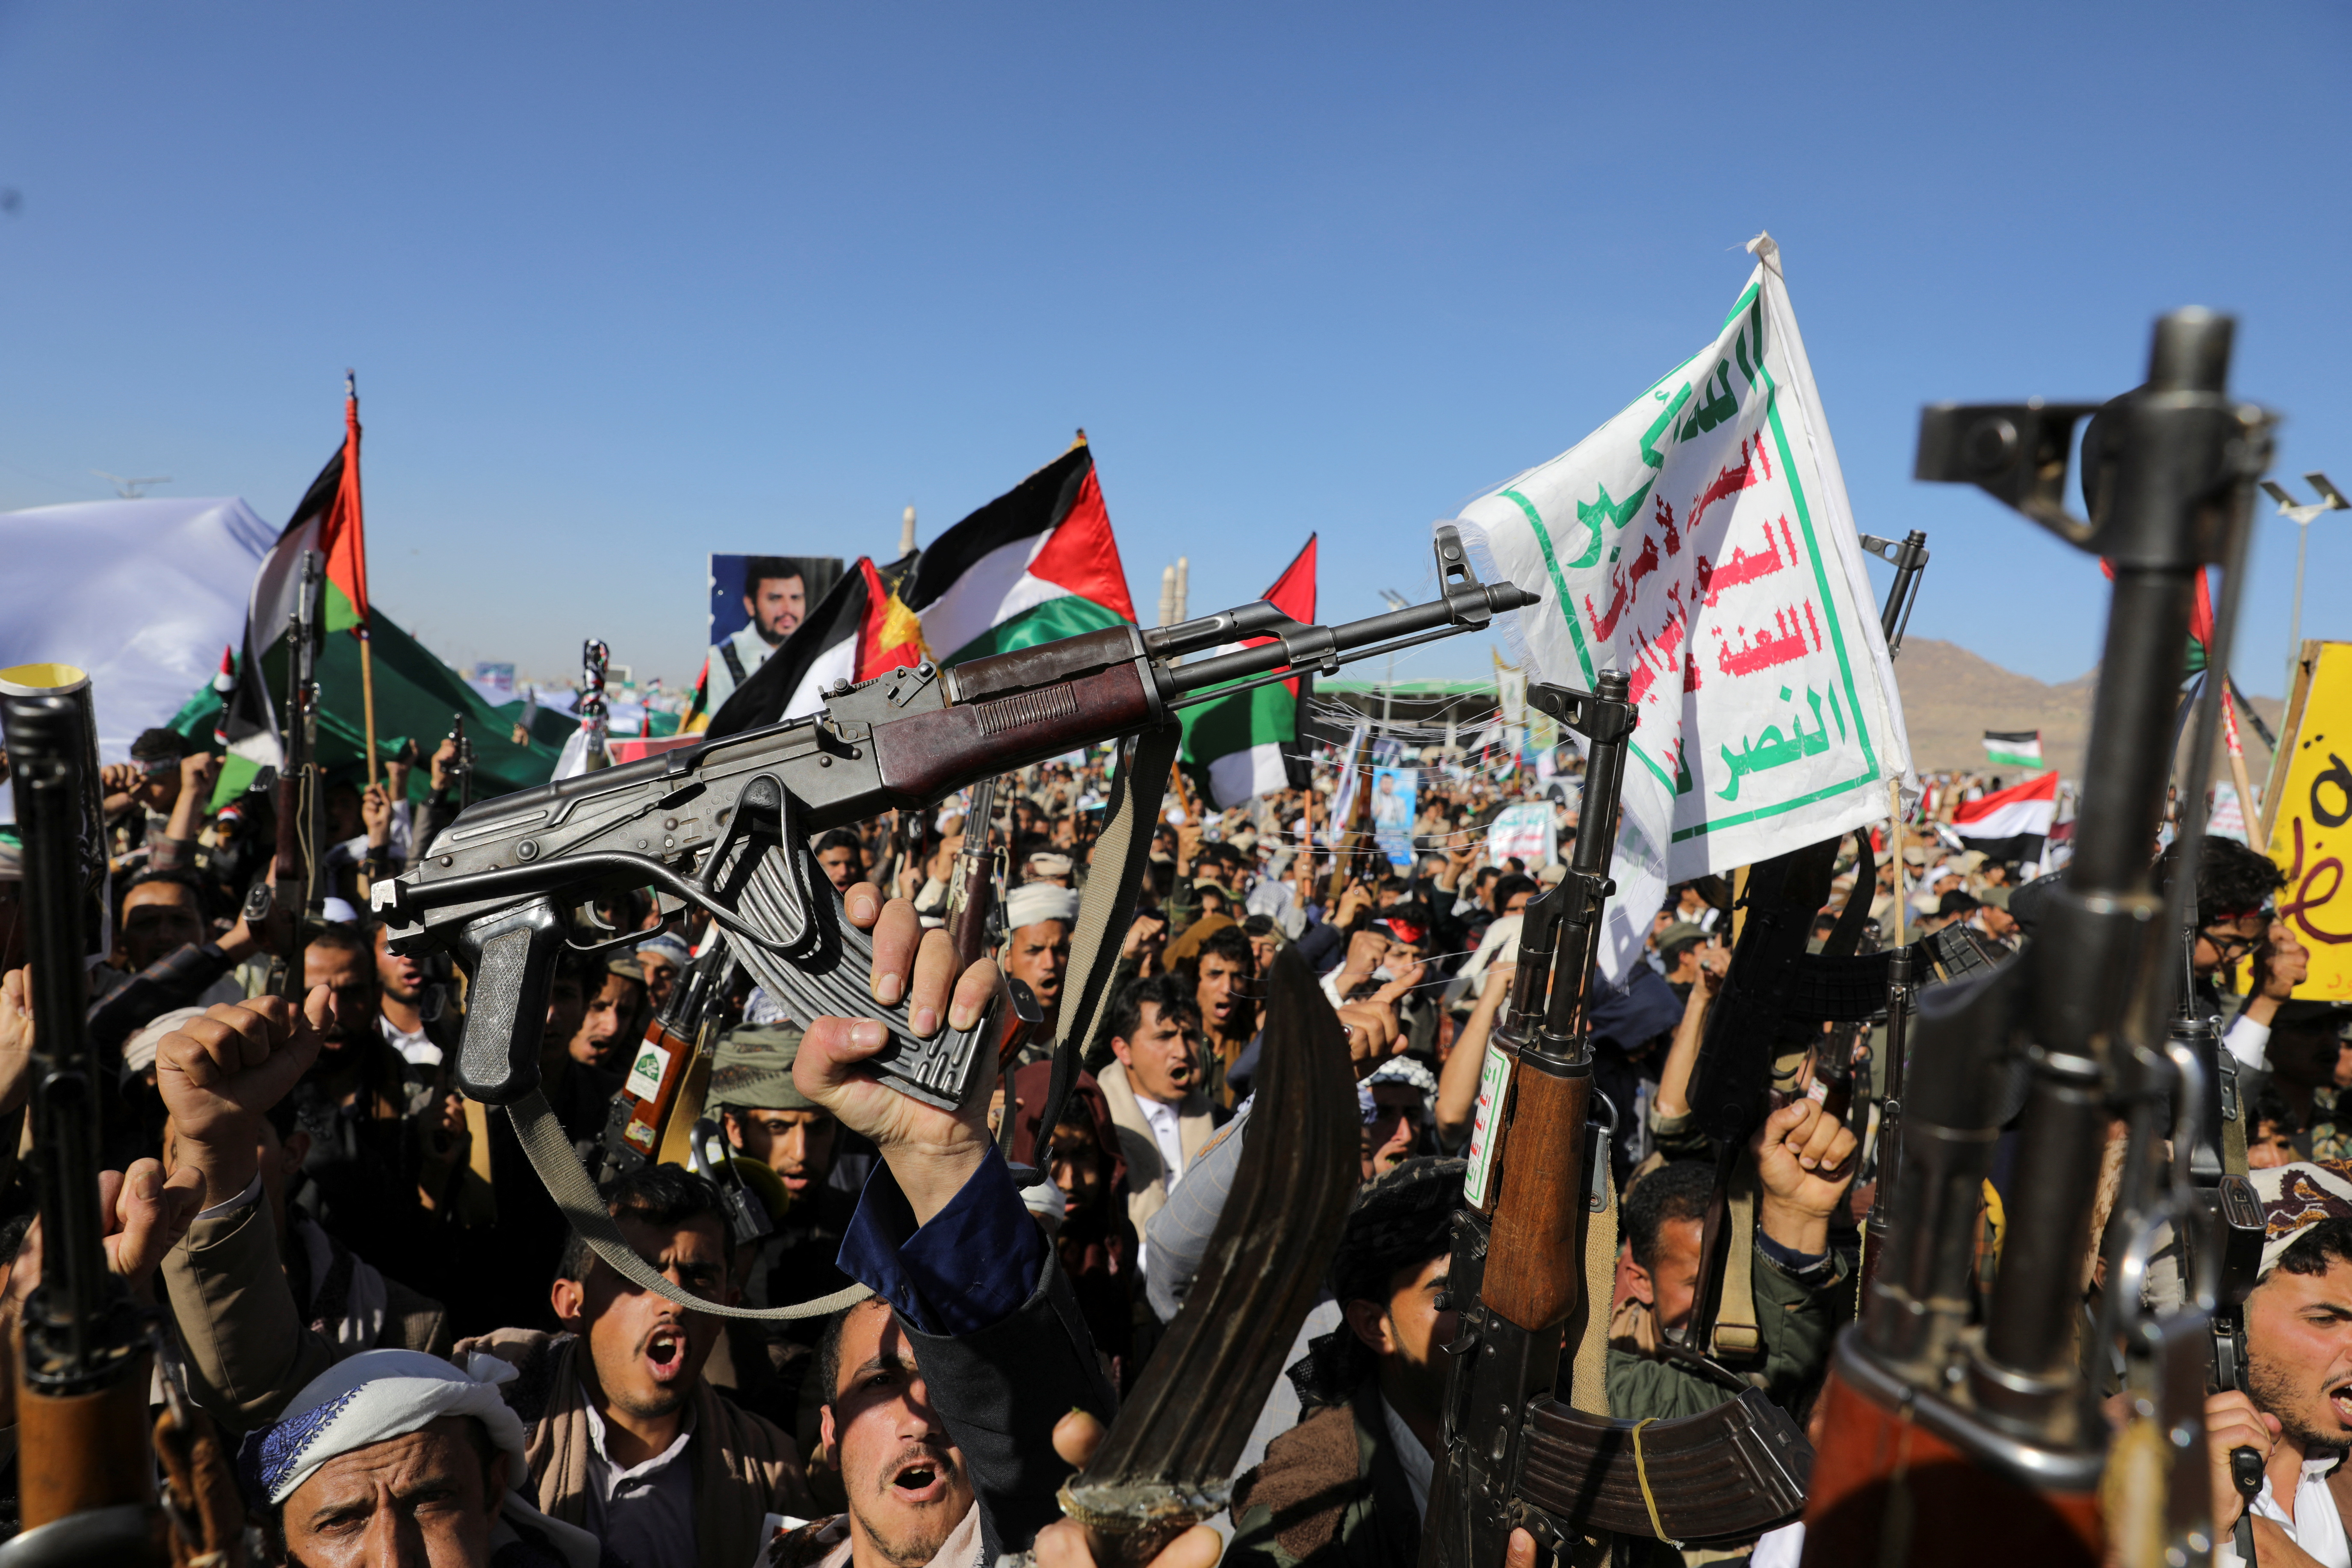 Houthi supporters rally in solidarity with the Palestinians in Gaza. /Khaled Abdullah/Reuters